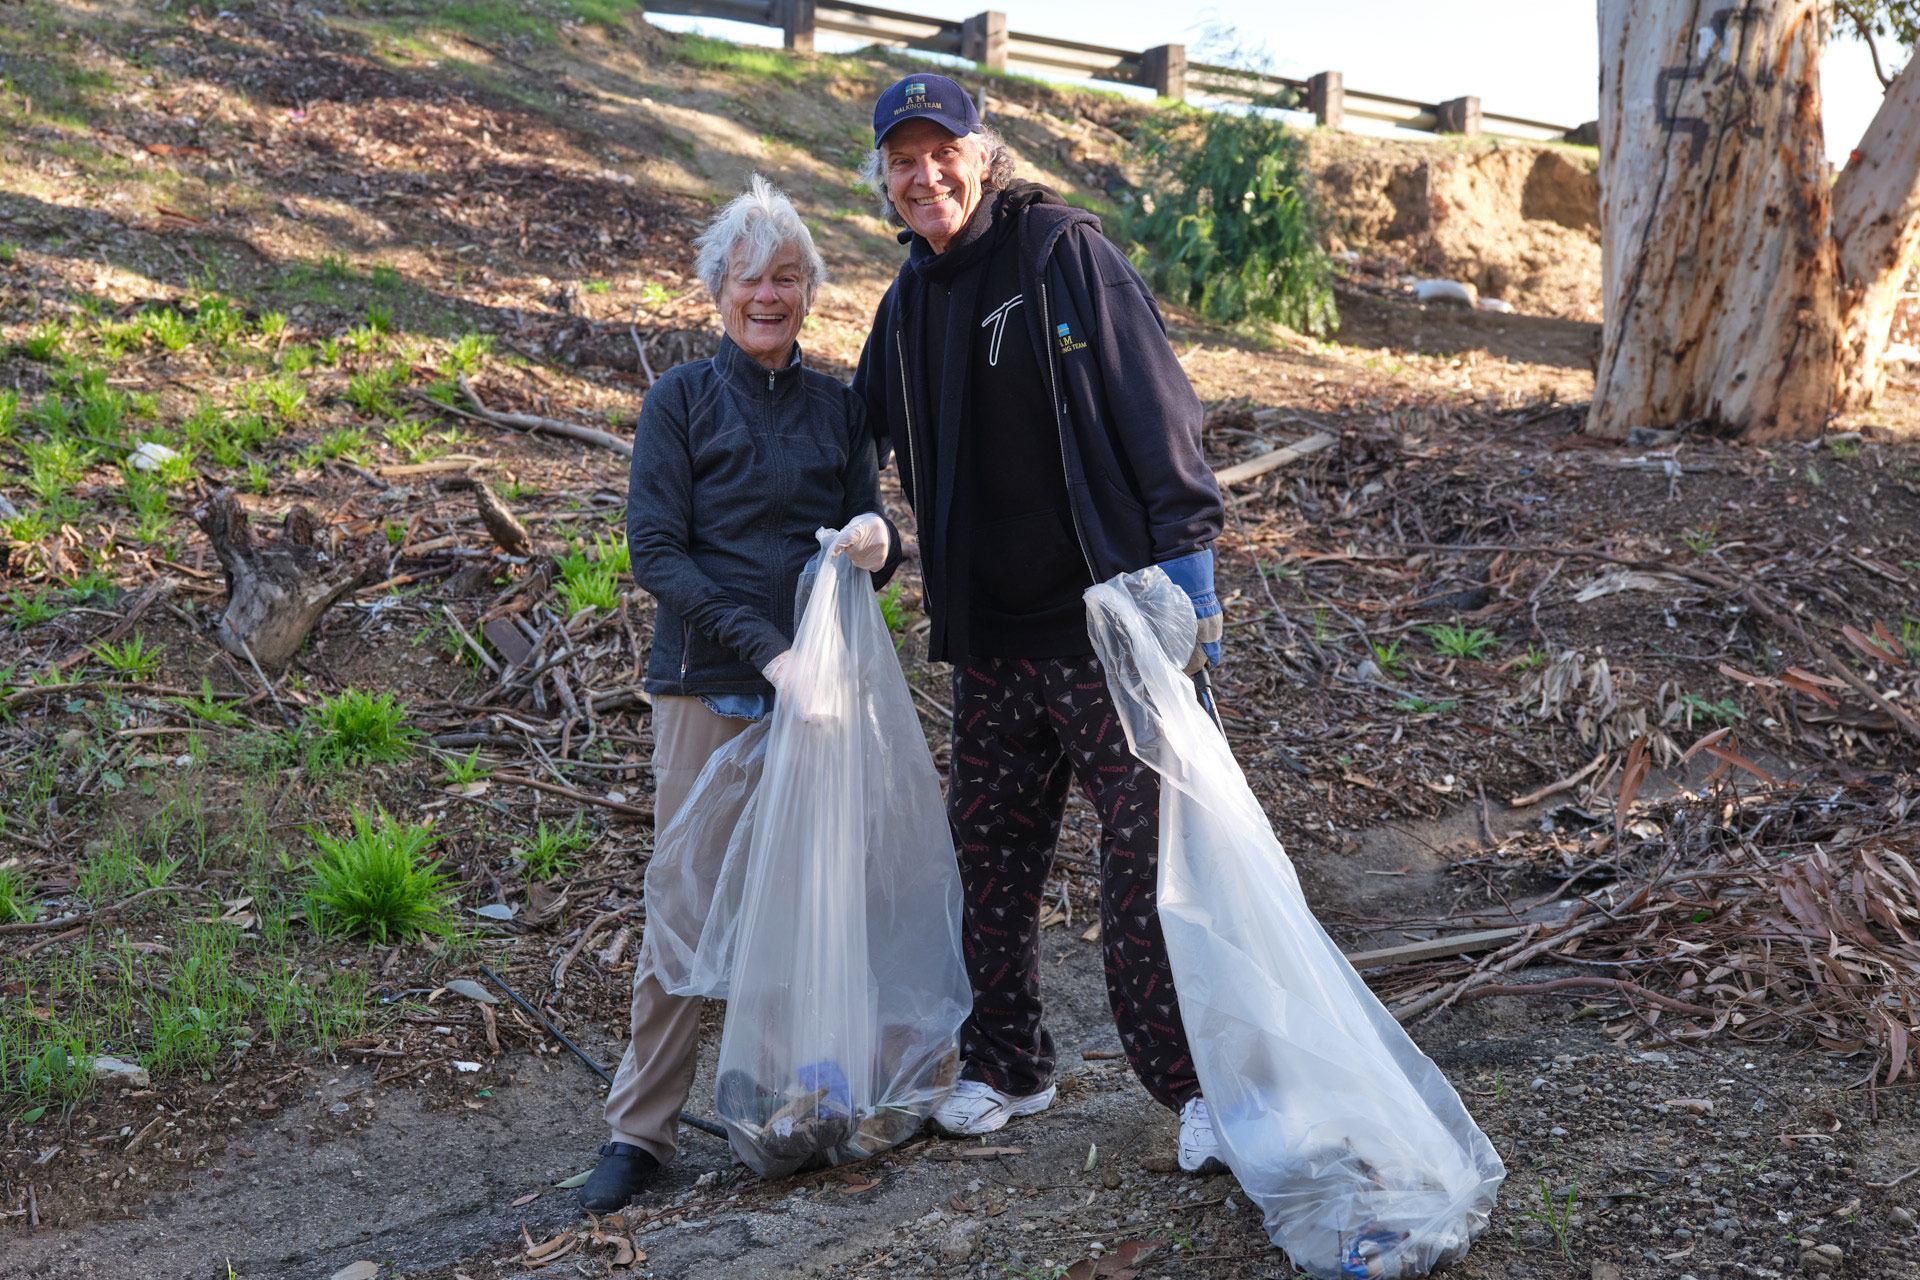 west-toluca-lake-community-cleanup-3